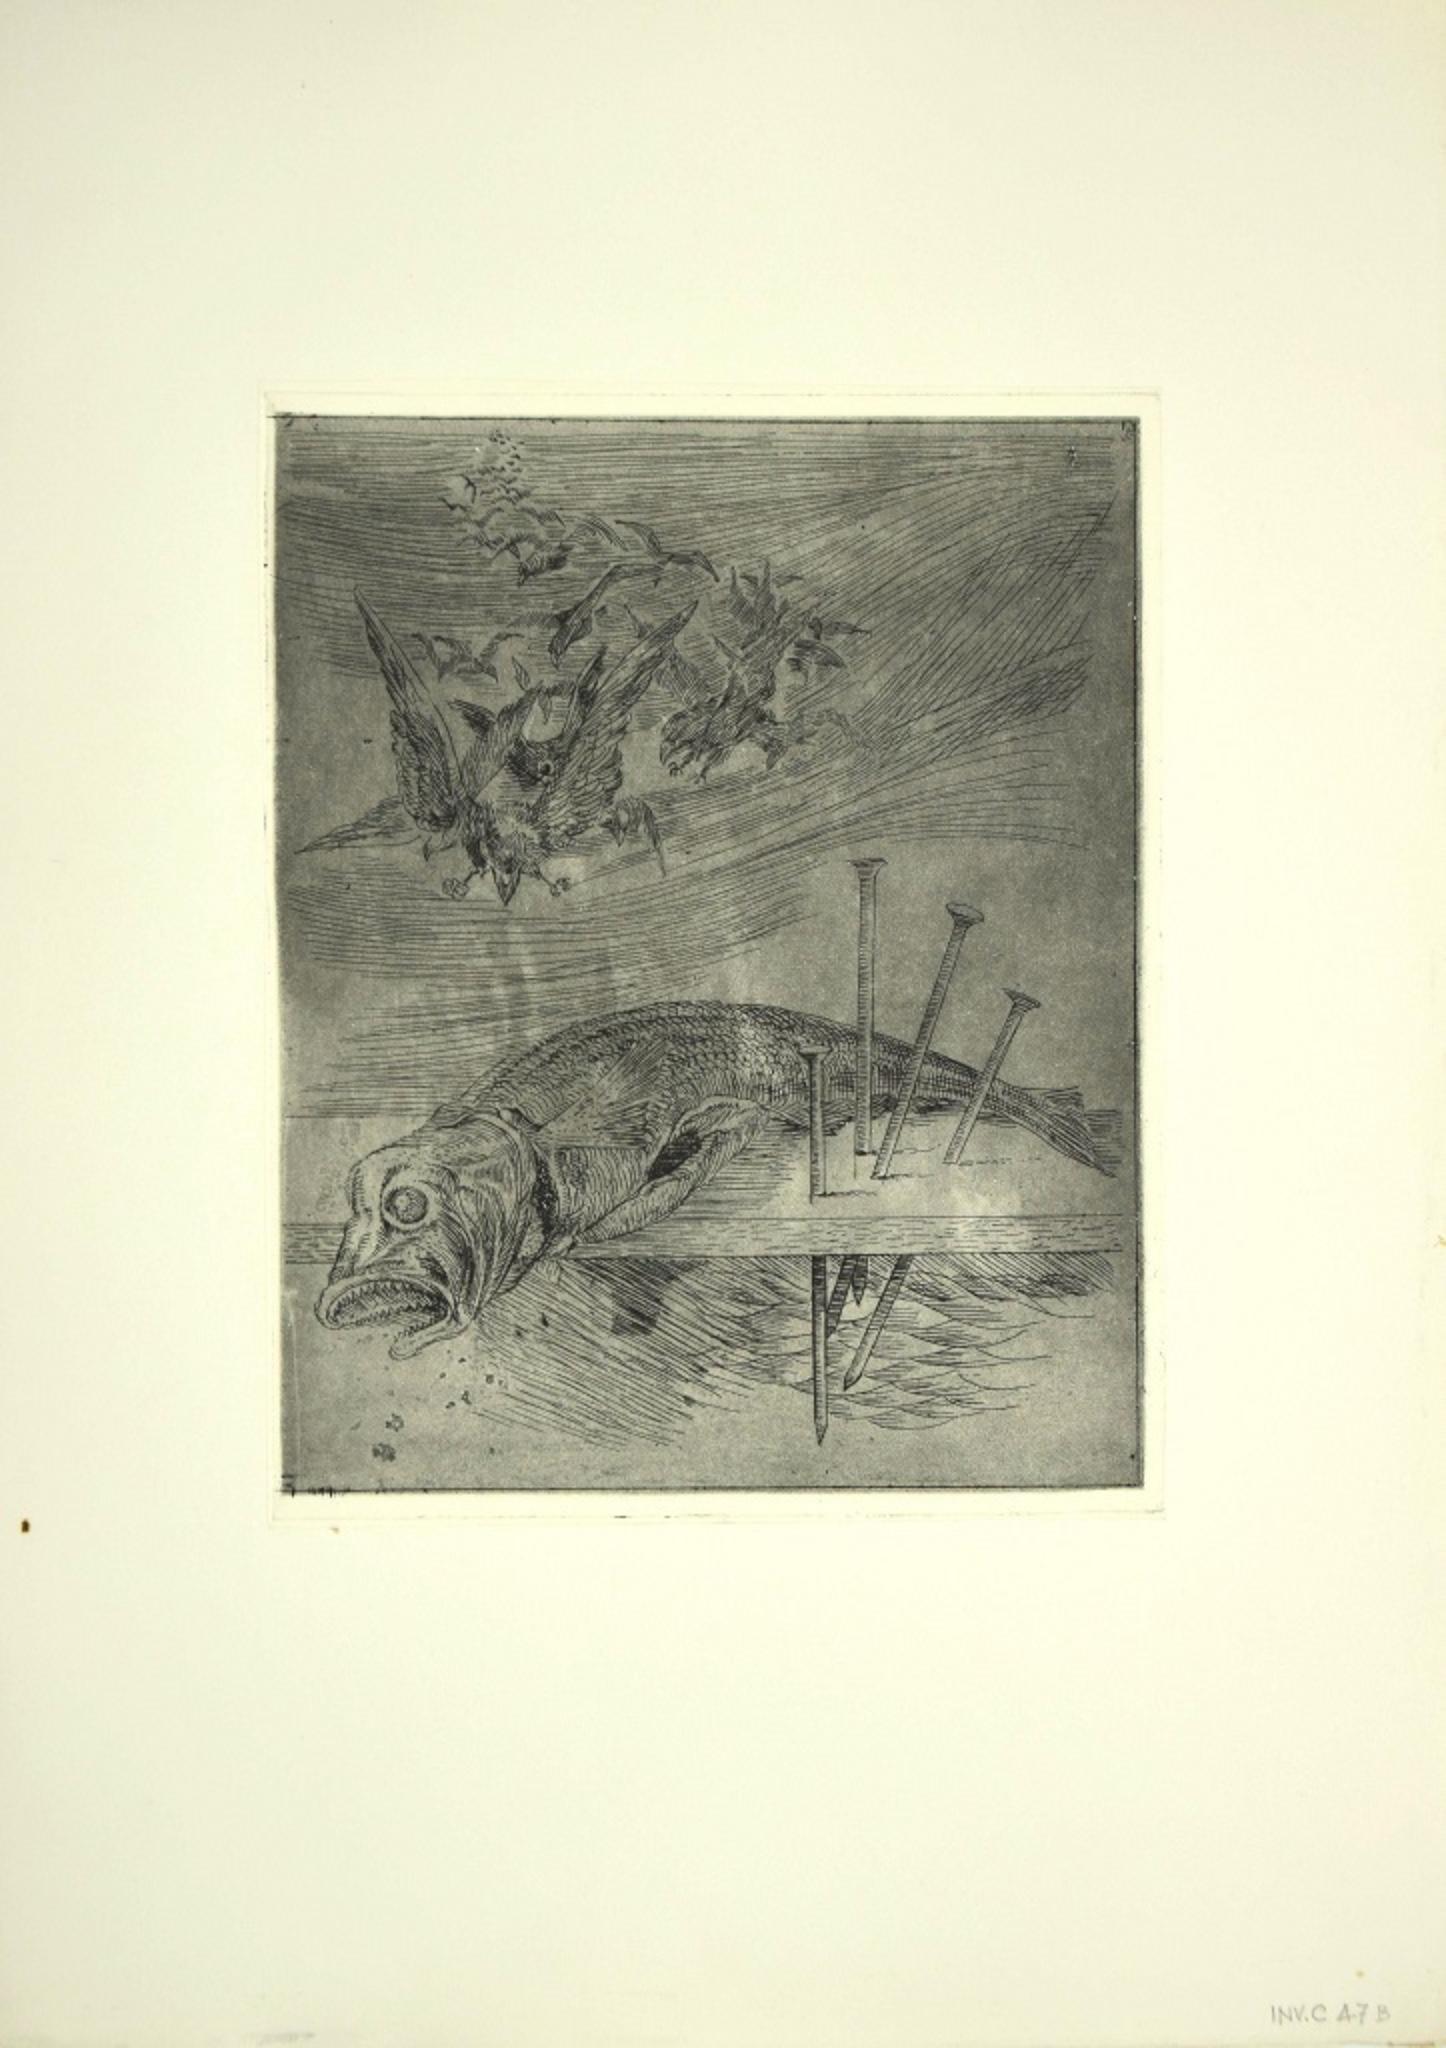 Fish is an original Contemporary artwork realized in Italy in the 1970s by the italian artist Leo Guida.

Etching on paper.

Not signed.

Mint conditions. 

Leo Guida. Sensitive to current issues, artistic movements and historical techniques, Leo